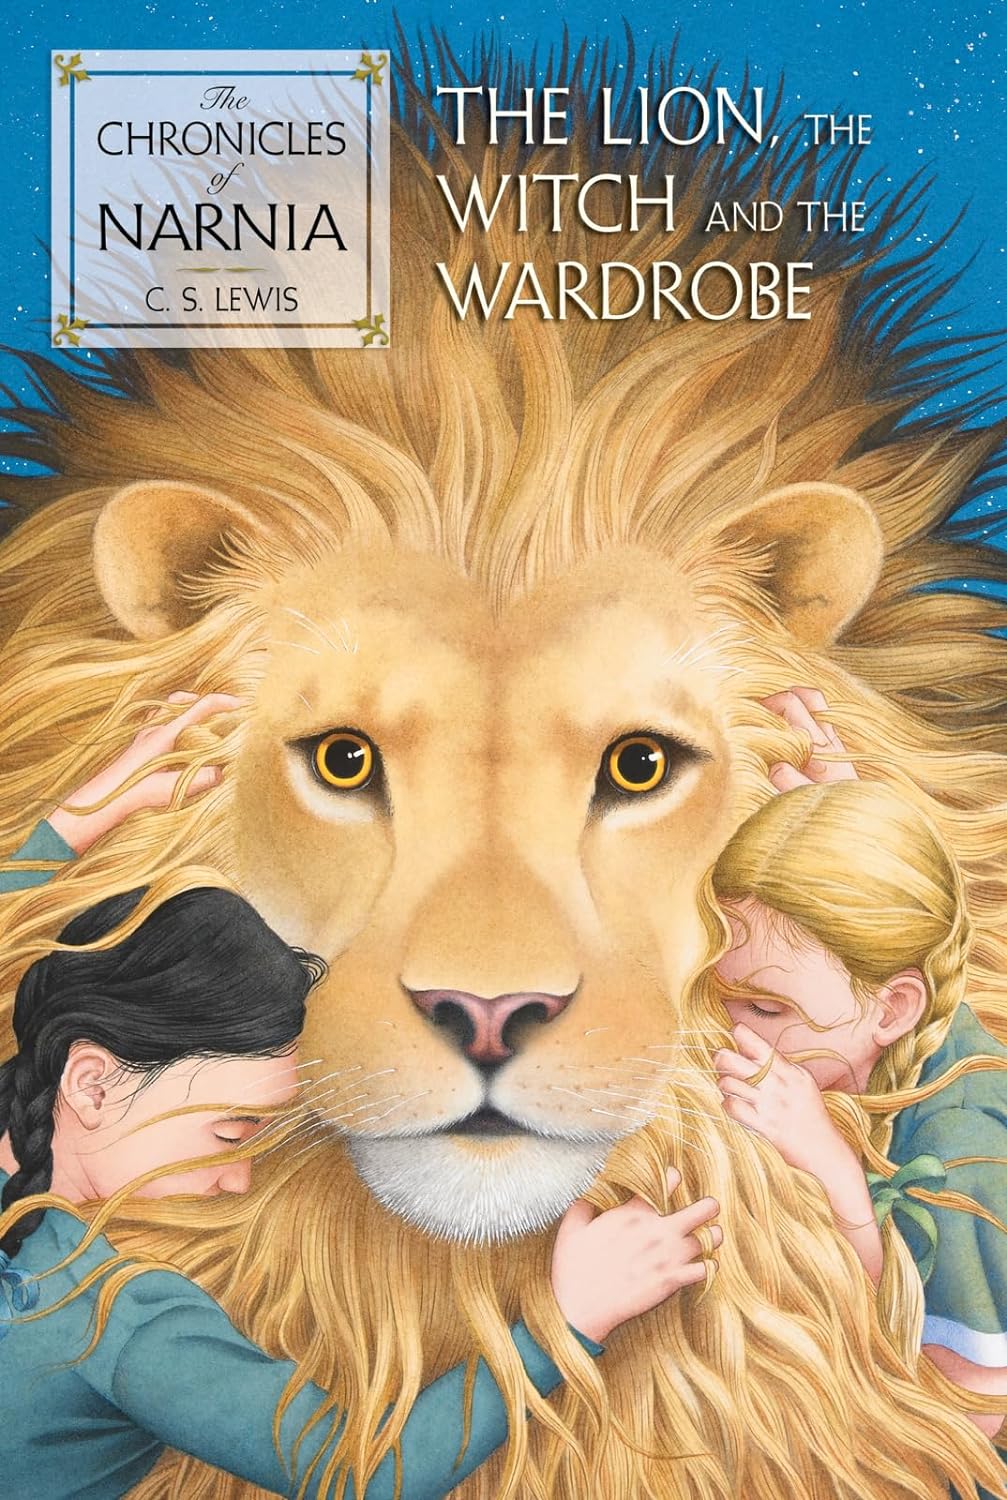 The Lion, the Witch, and the Wardrobe by C.S. Lewis (1950)